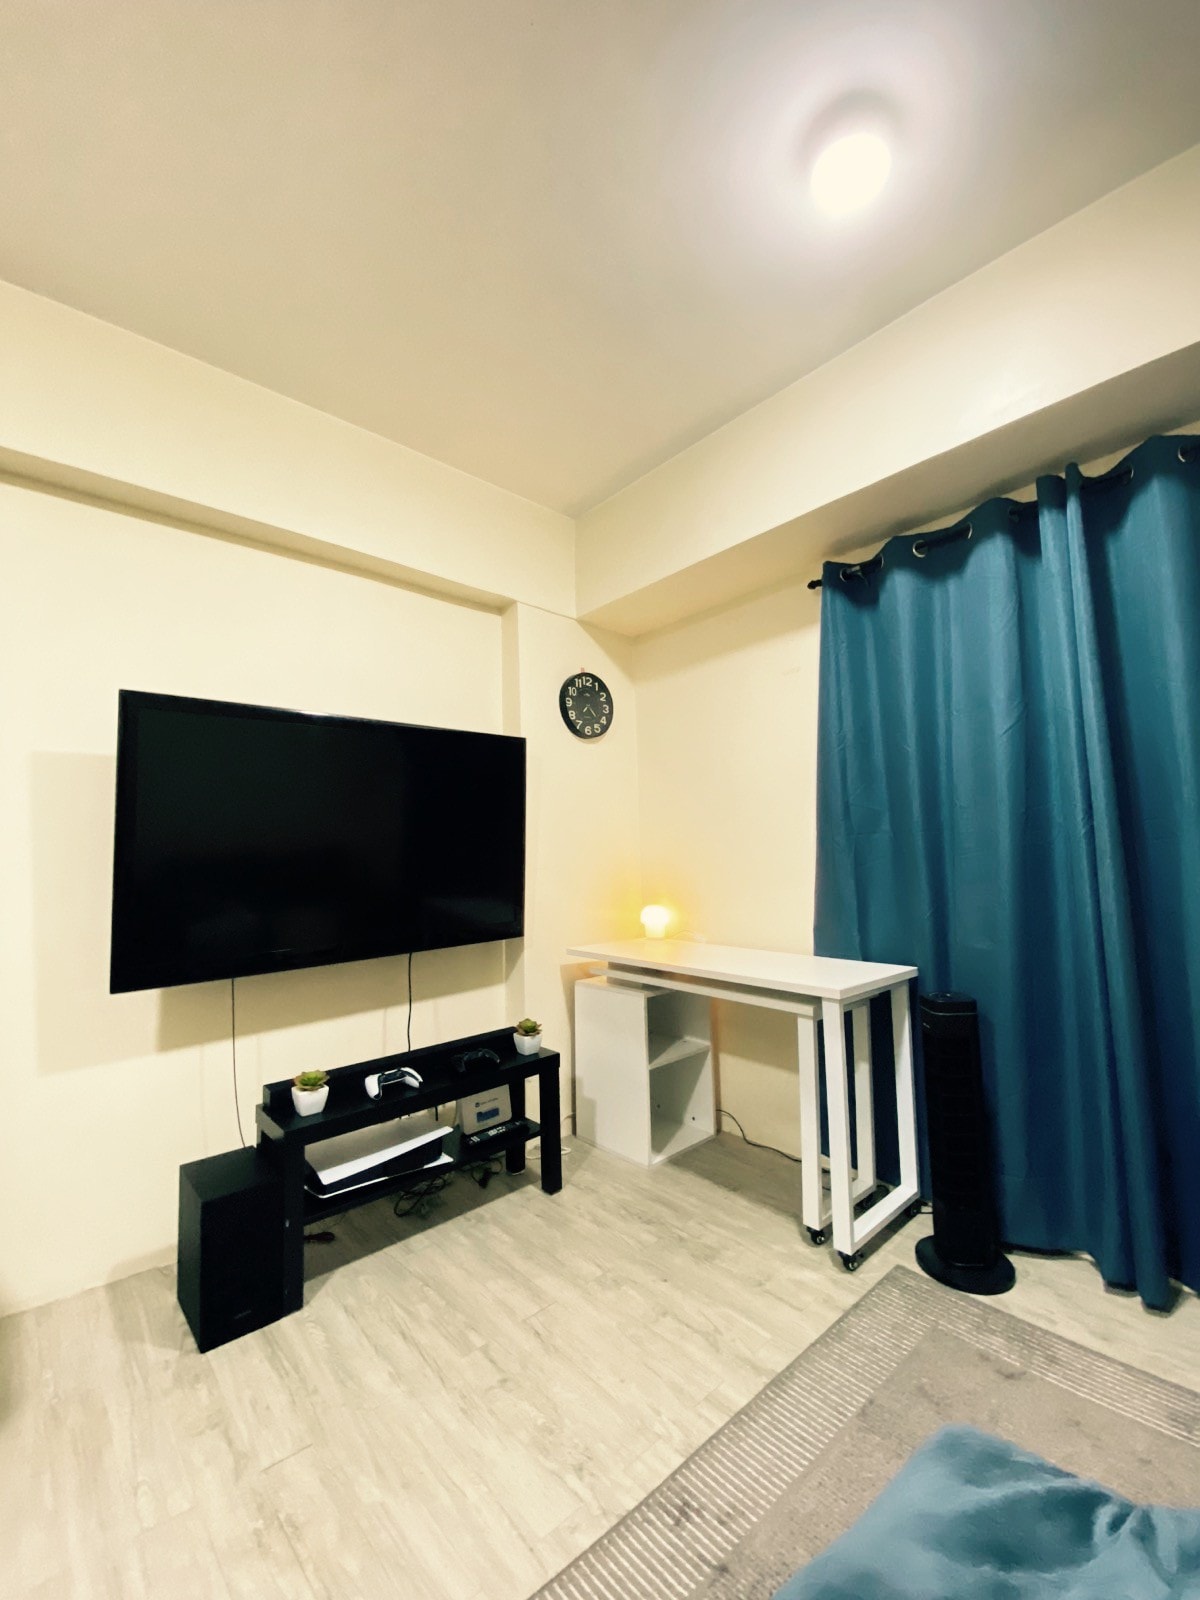 Condo Unit for Gamers/Remote Workers